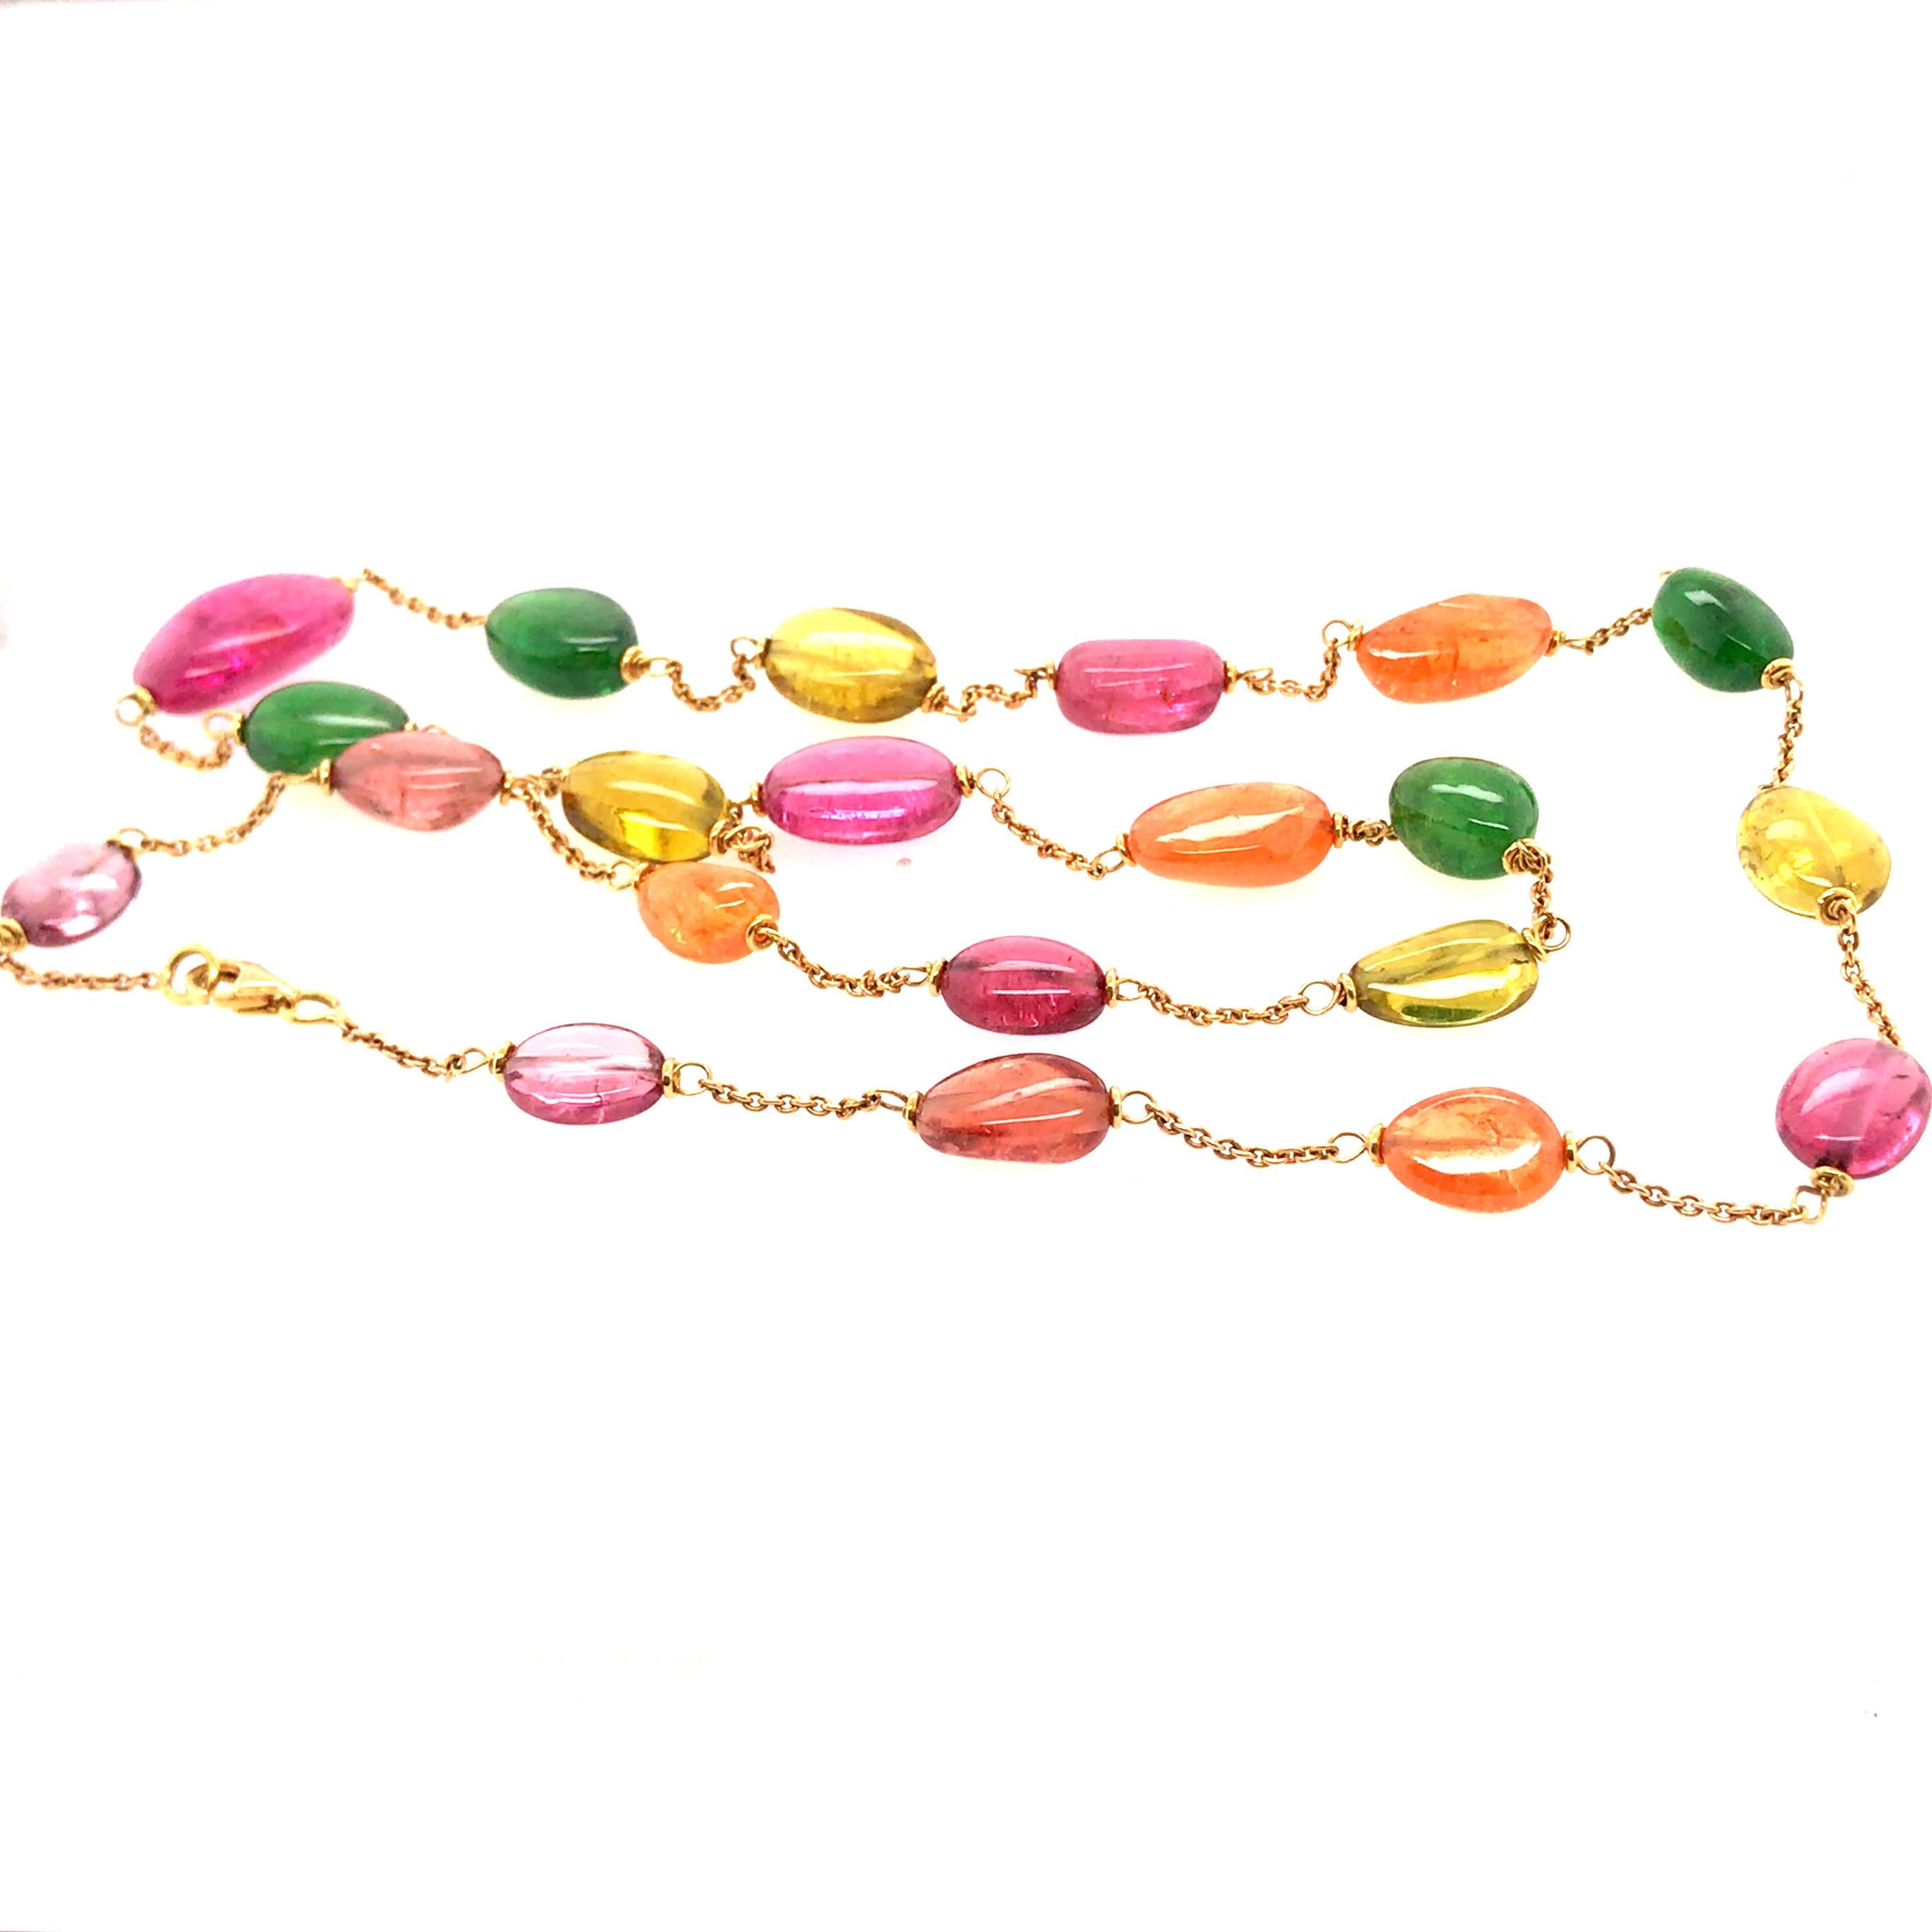 Women's Emerald and Multicolored Tourmaline Necklace in 18 Karat Yellow Gold